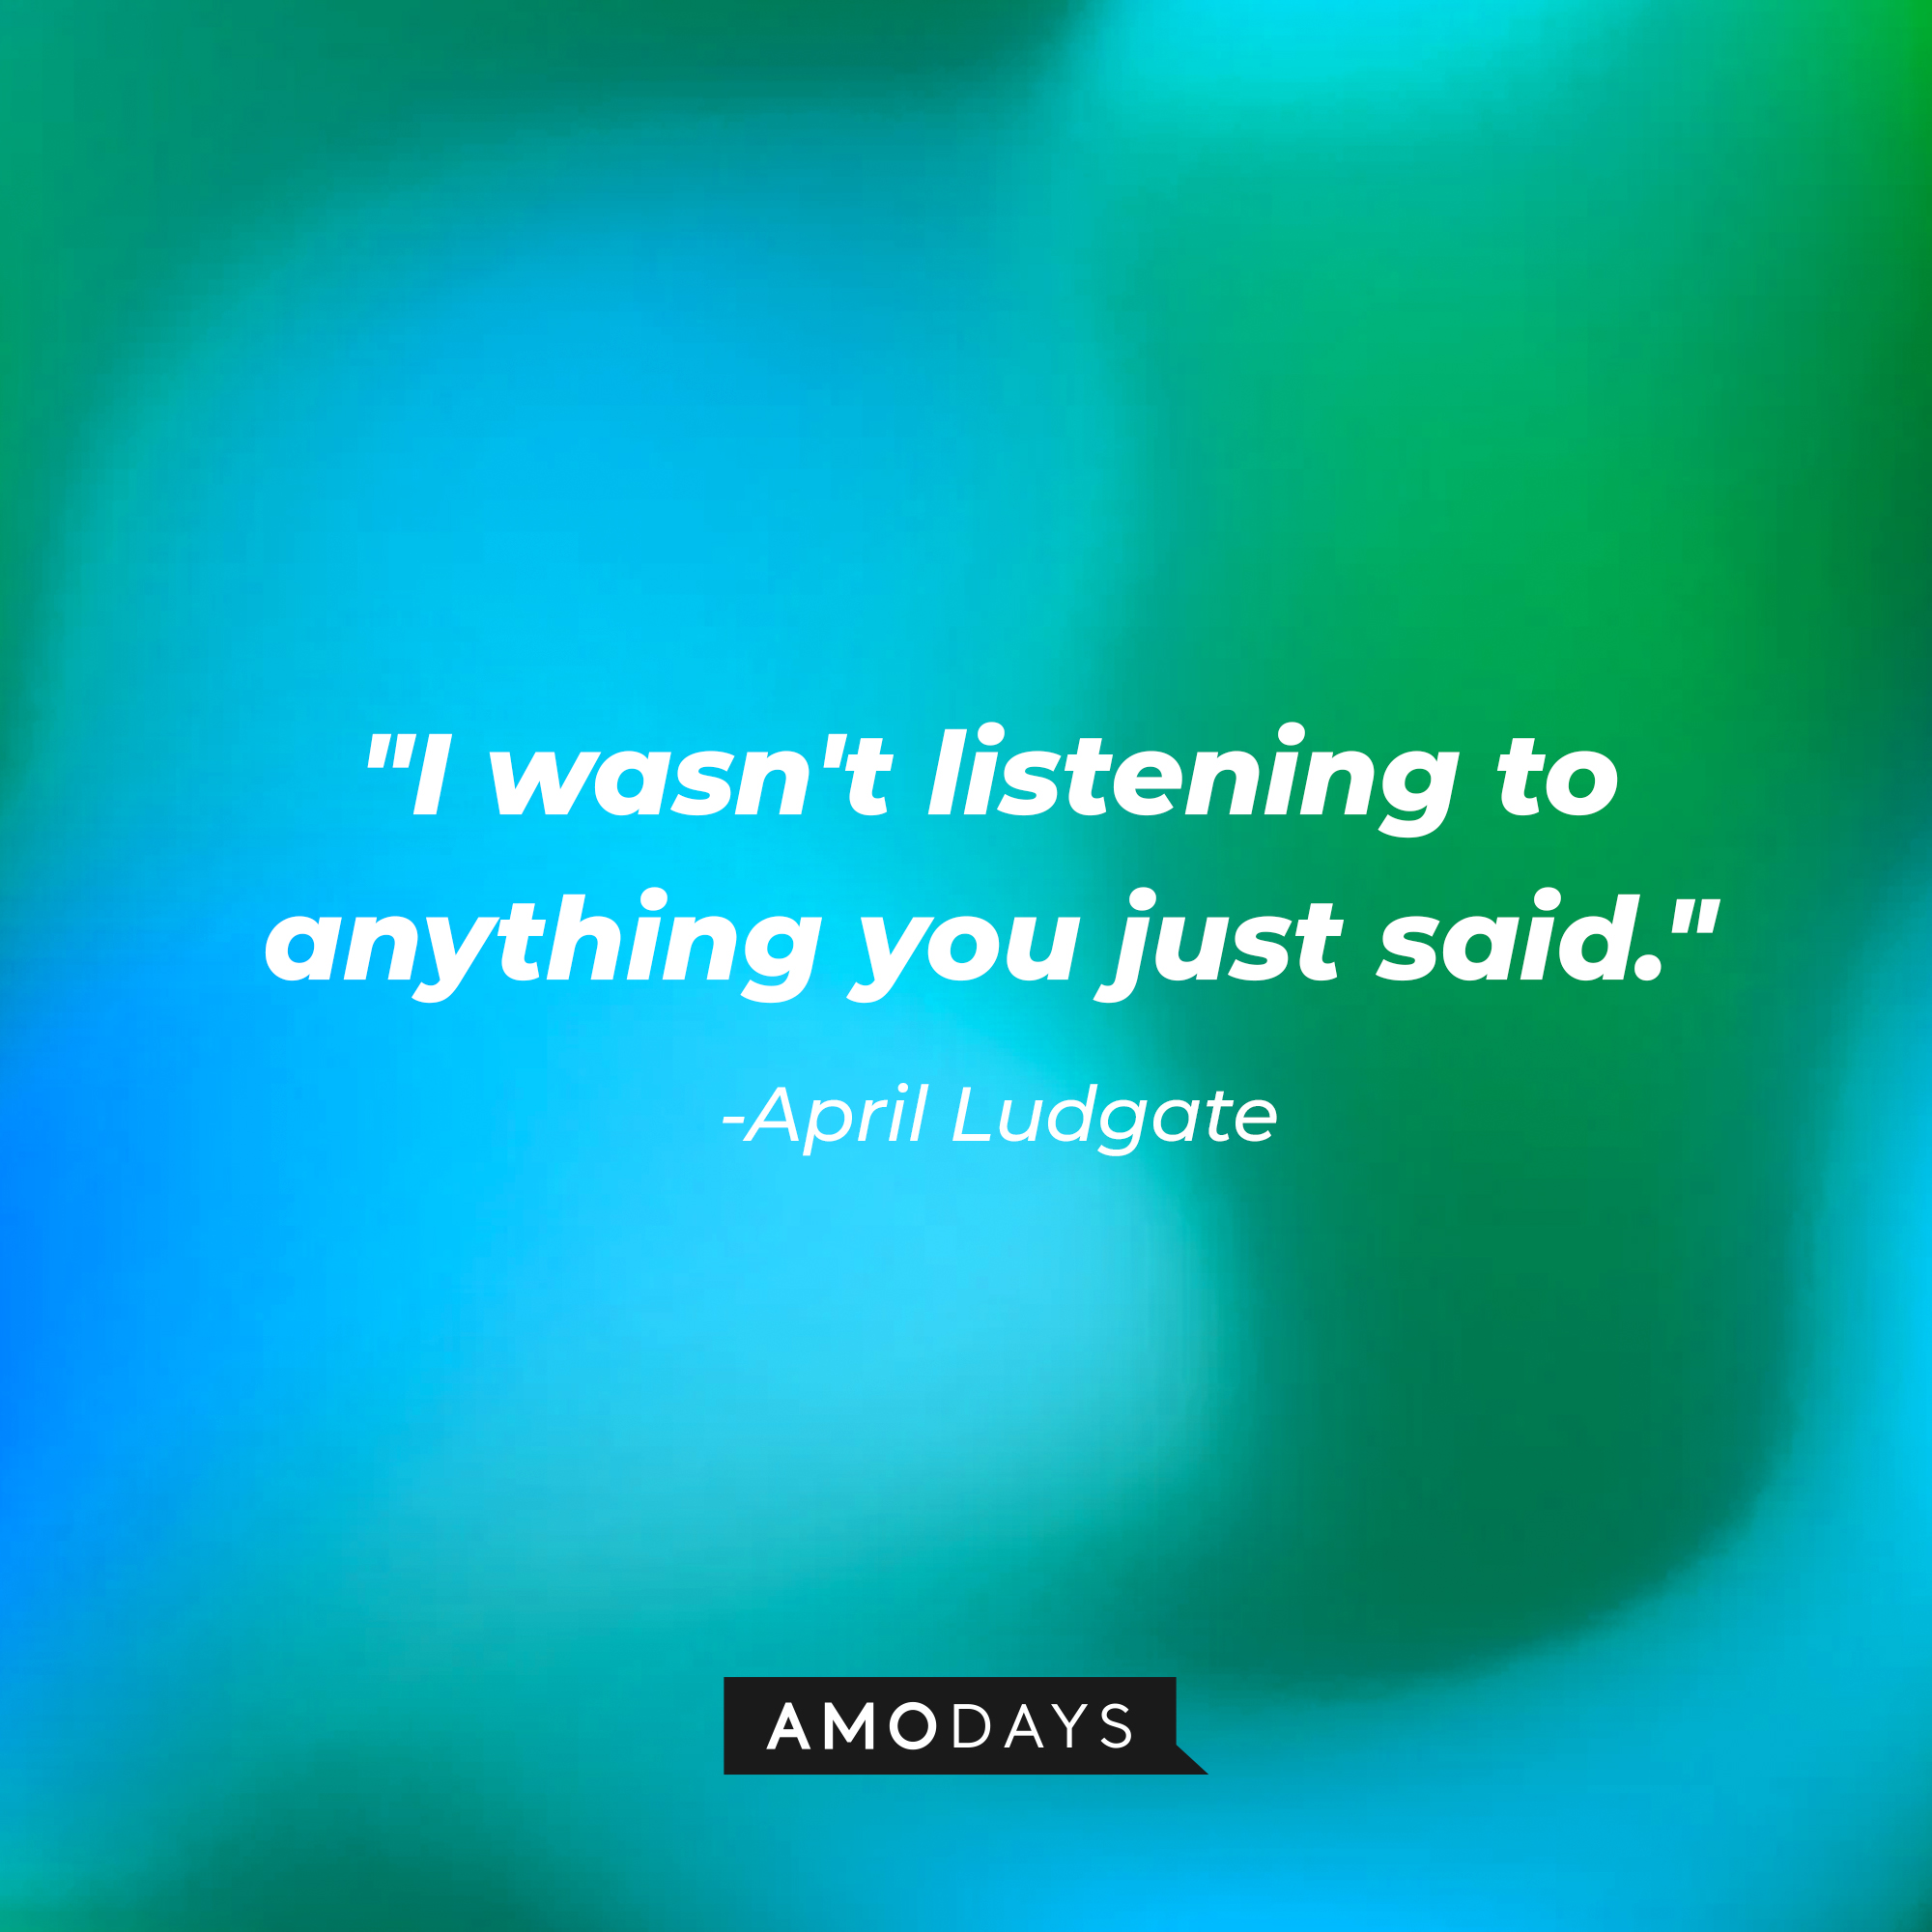 April Ludgate's quote, "I wasn't listening to anything you just said." | Source: AmoDays